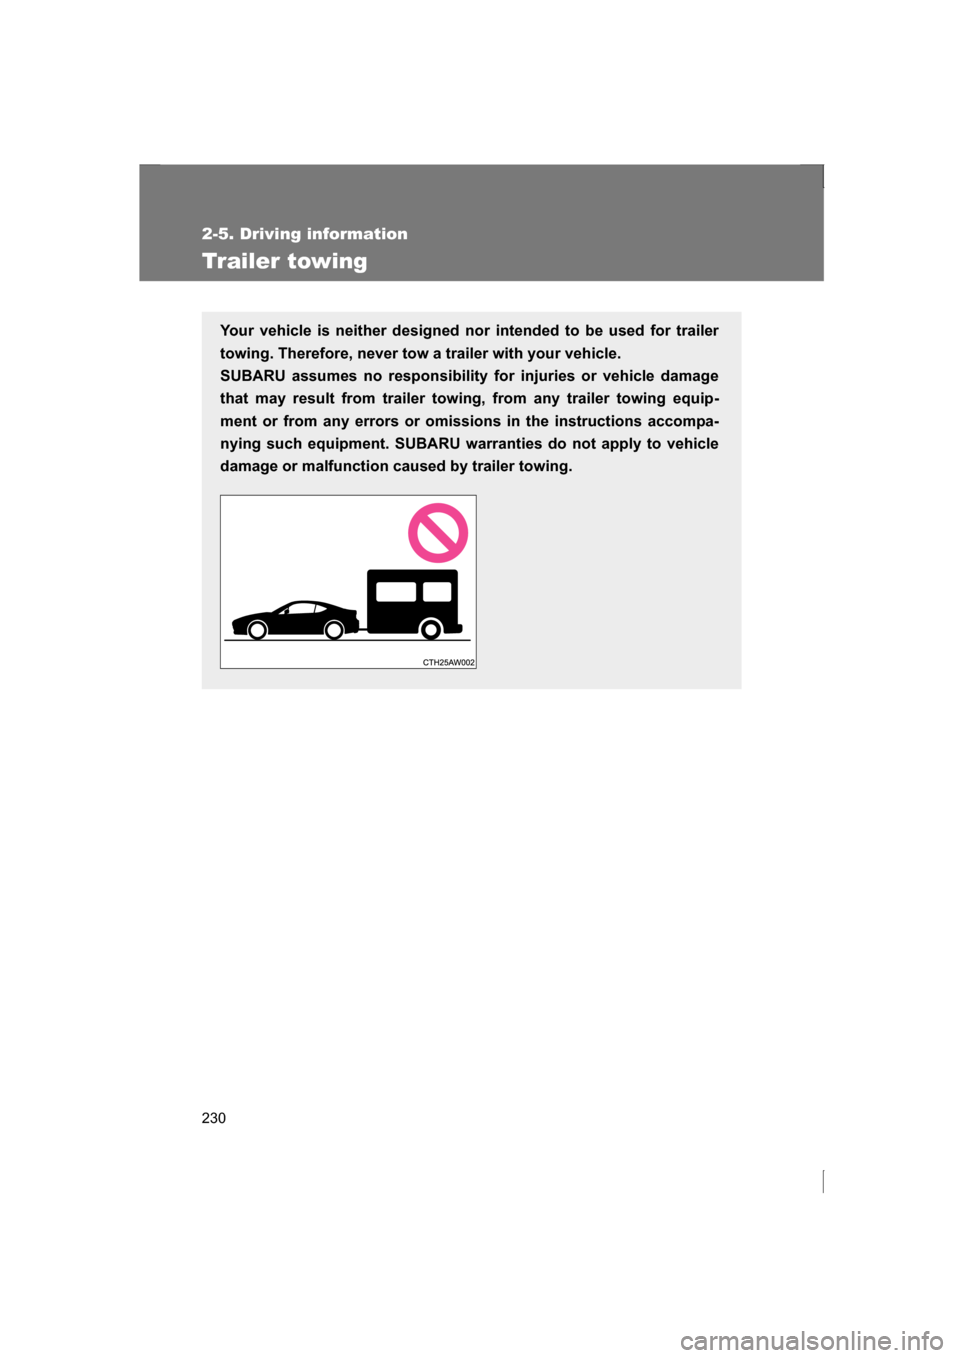 SUBARU BRZ 2013 1.G Owners Manual 230
2-5. Driving information
Trailer towing
Your vehicle is neither designed nor intended to be used for trailer 
towing. Therefore, never tow a trailer with your vehicle. 
SUBARU assumes no responsib